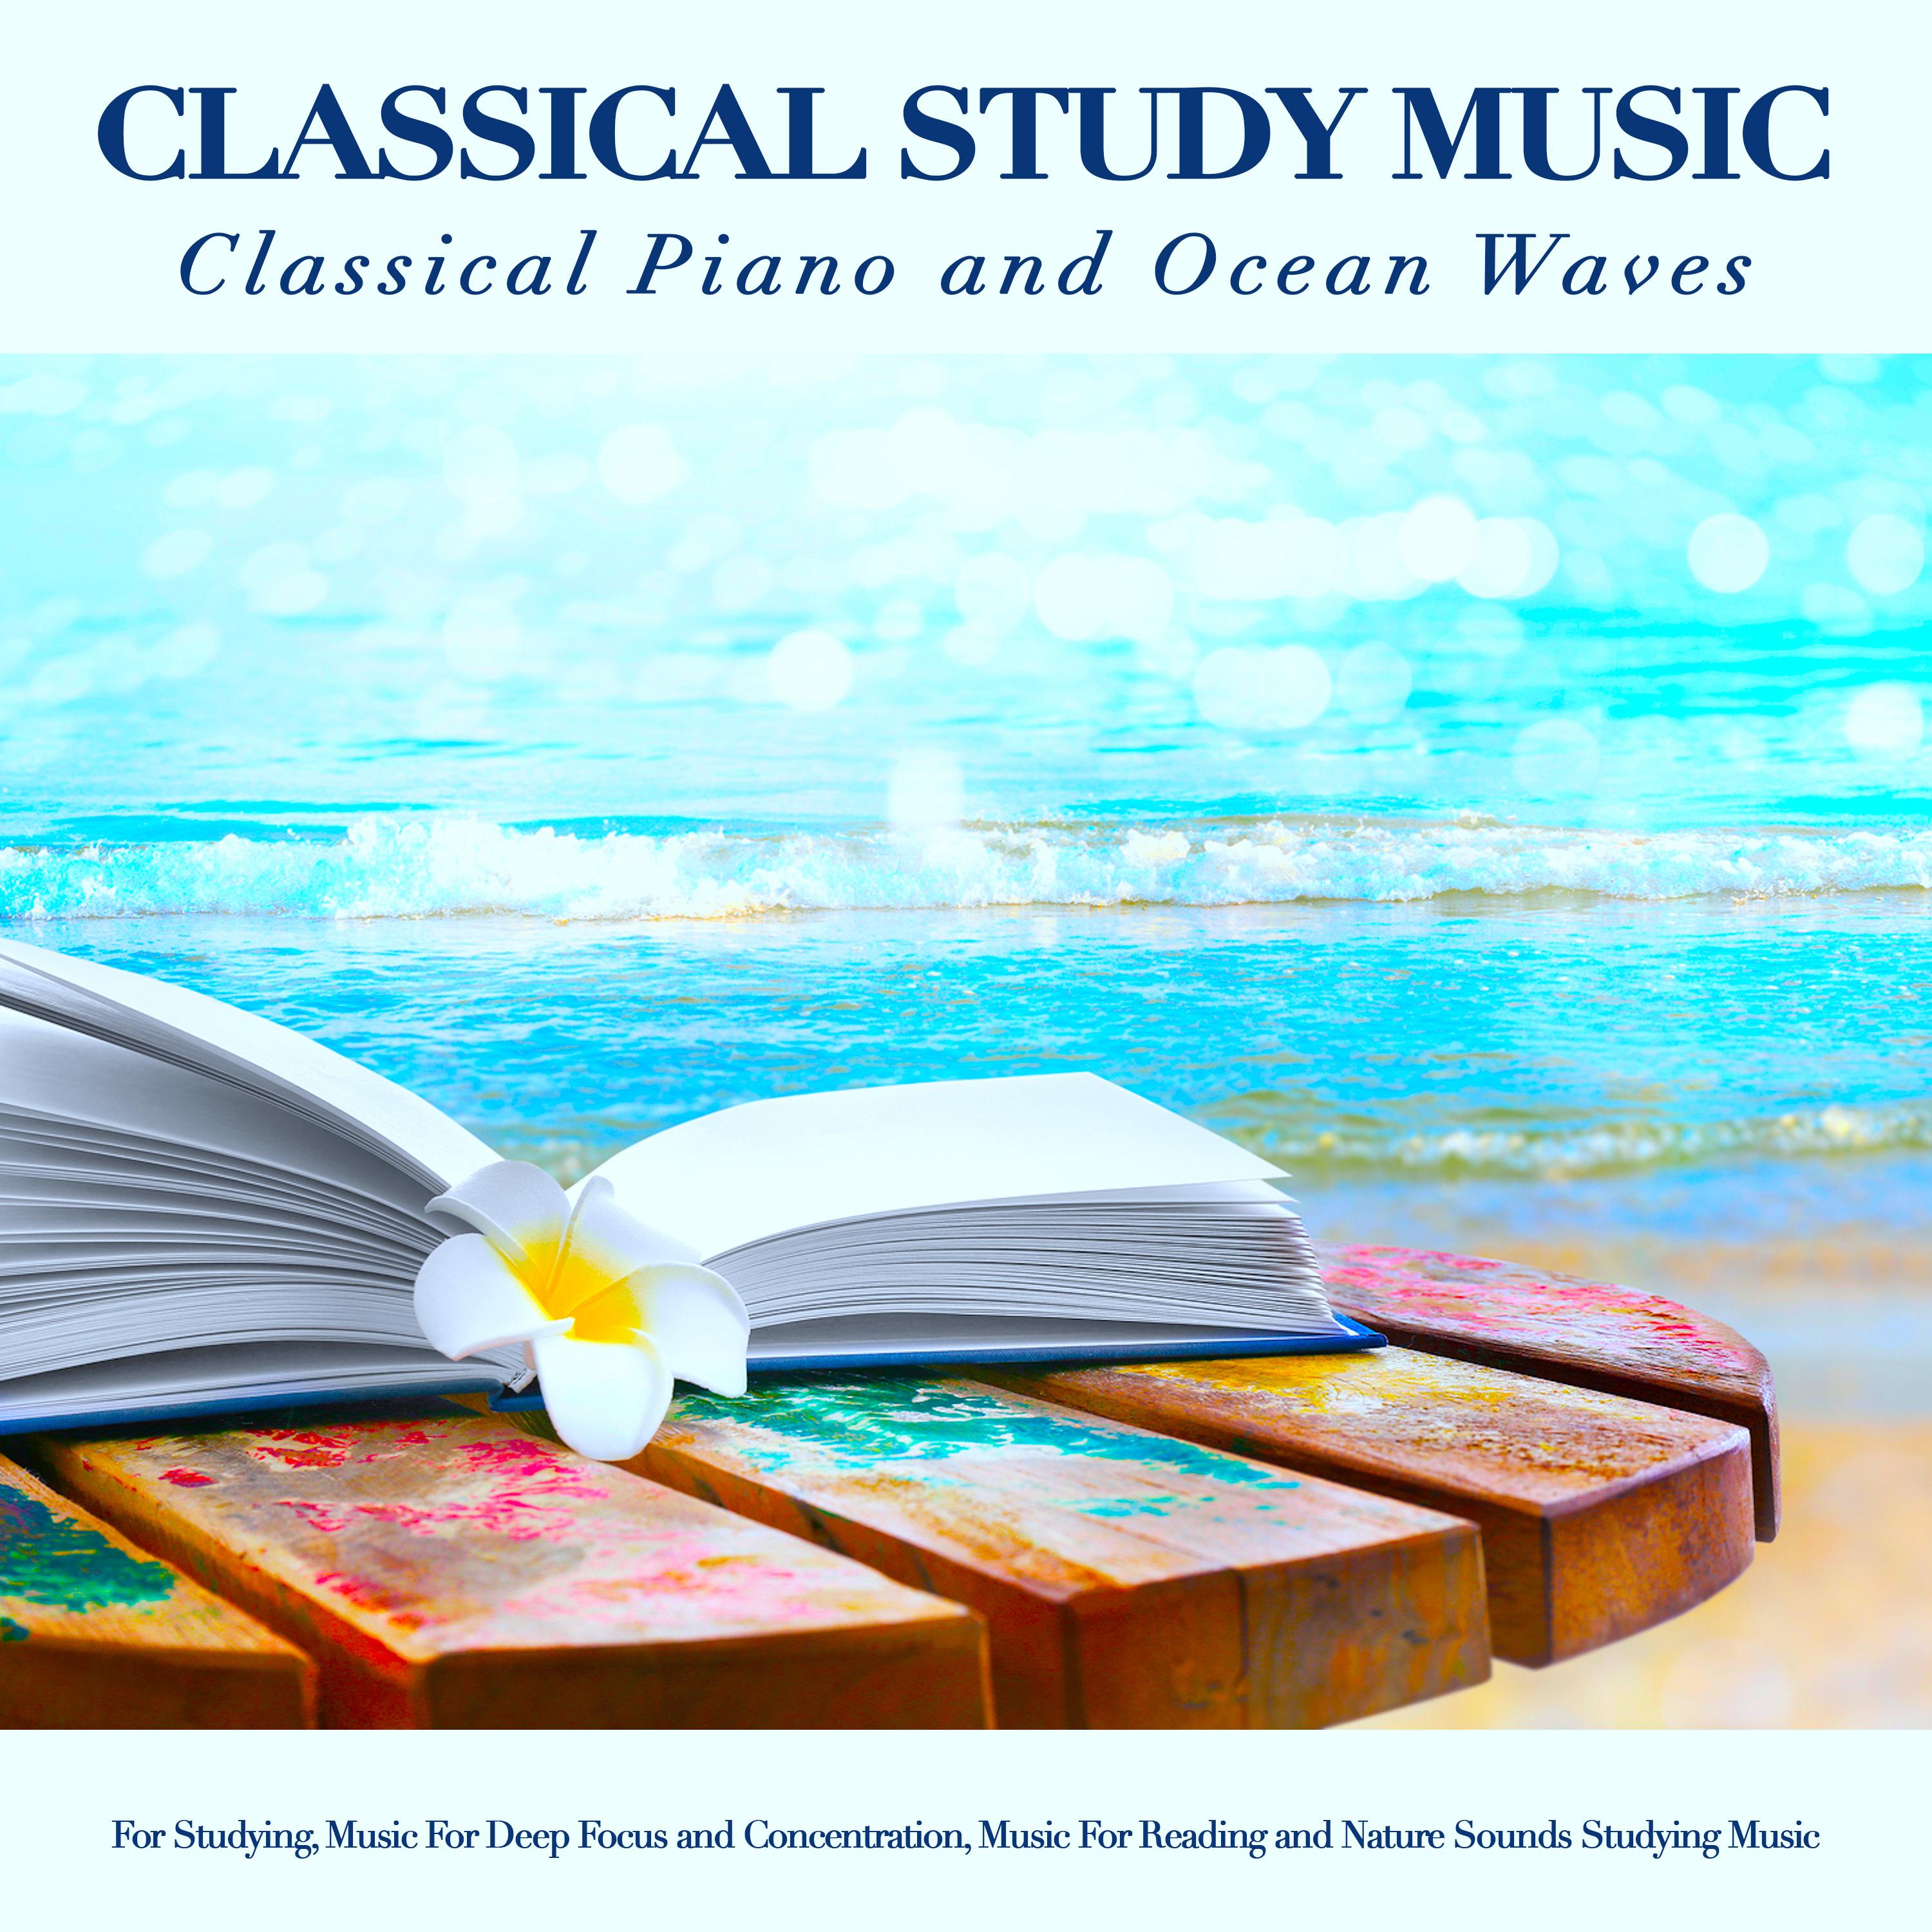 Canon in D - Pachelbel - Classical Study Music - Ocean Waves Sounds - Classical Piano for Studying